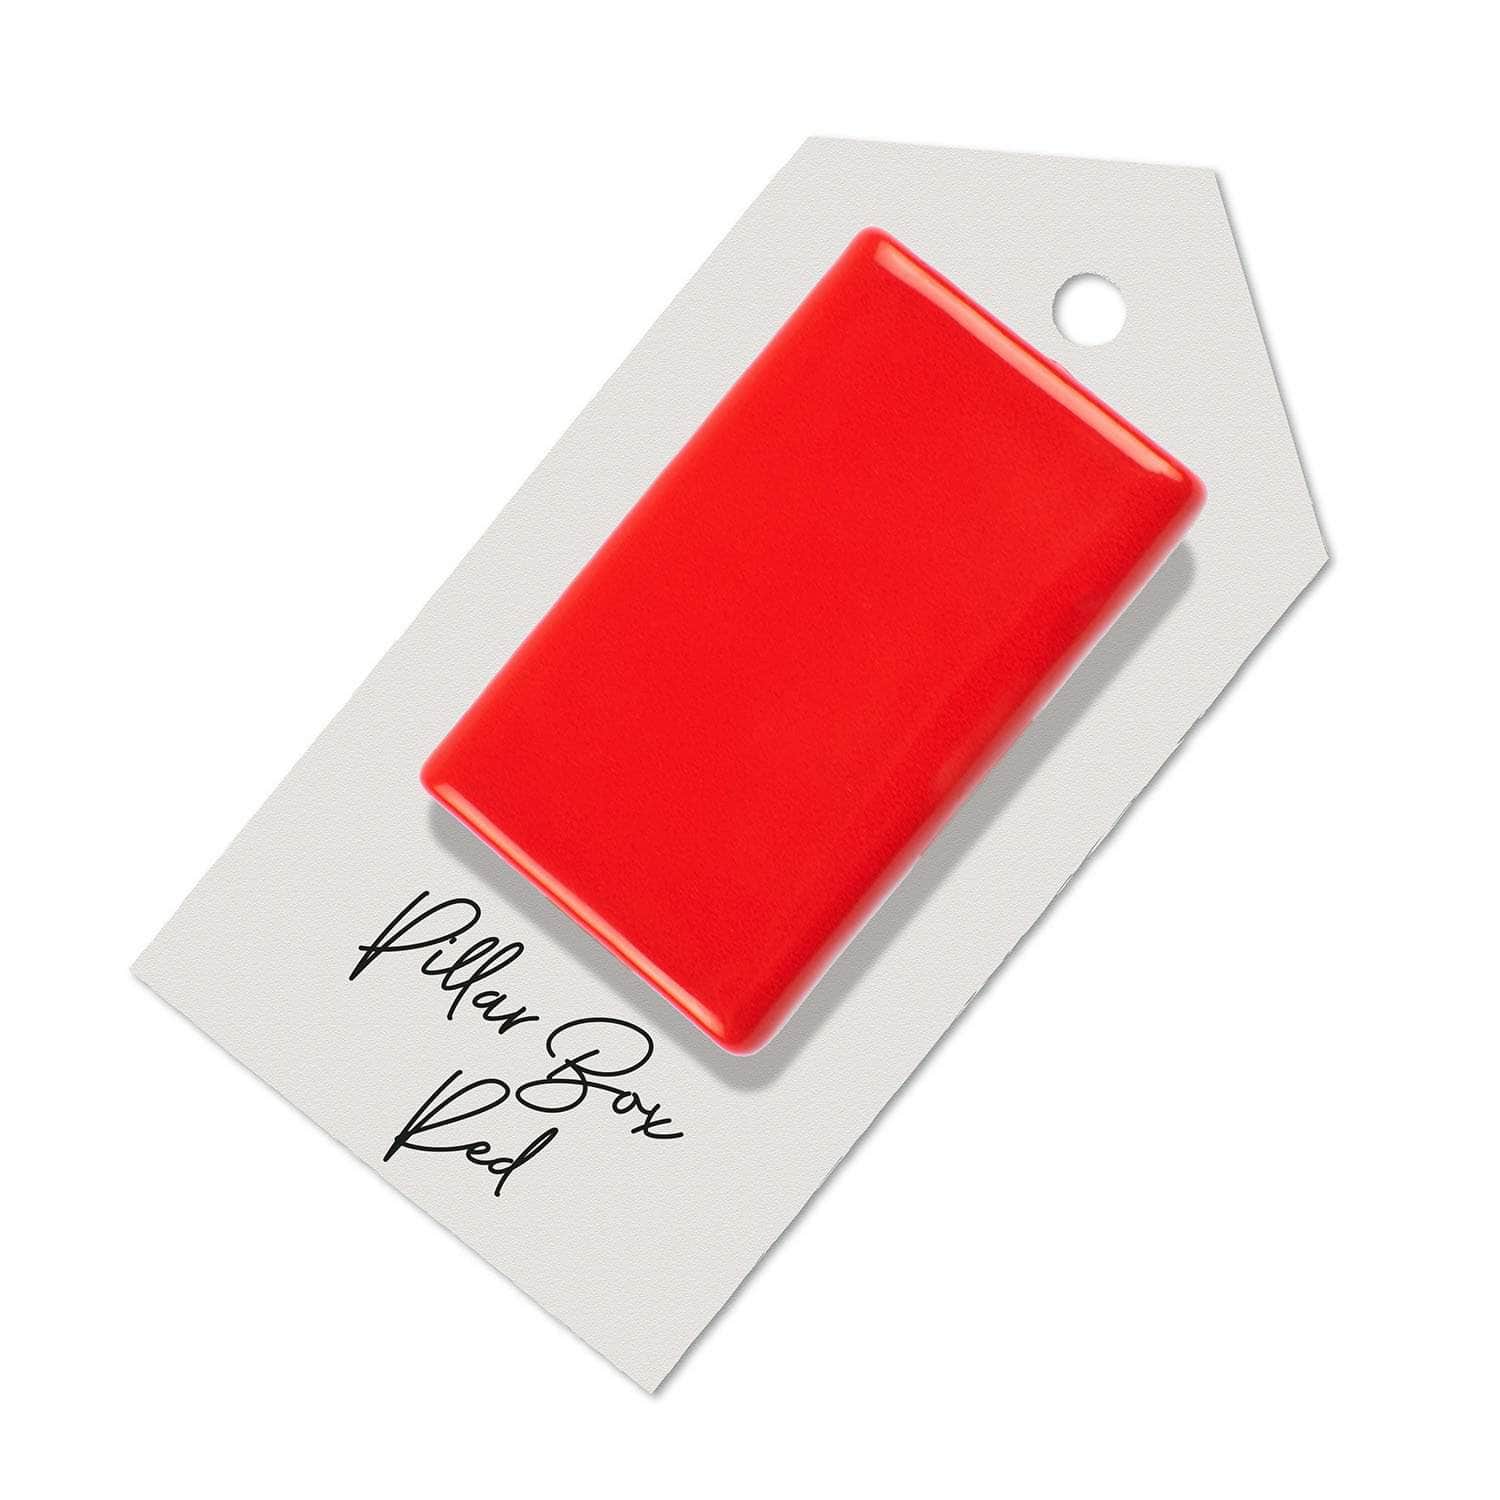 Pillar Box Red sample for Aga range cooker re-enamelling & reconditioned cookers